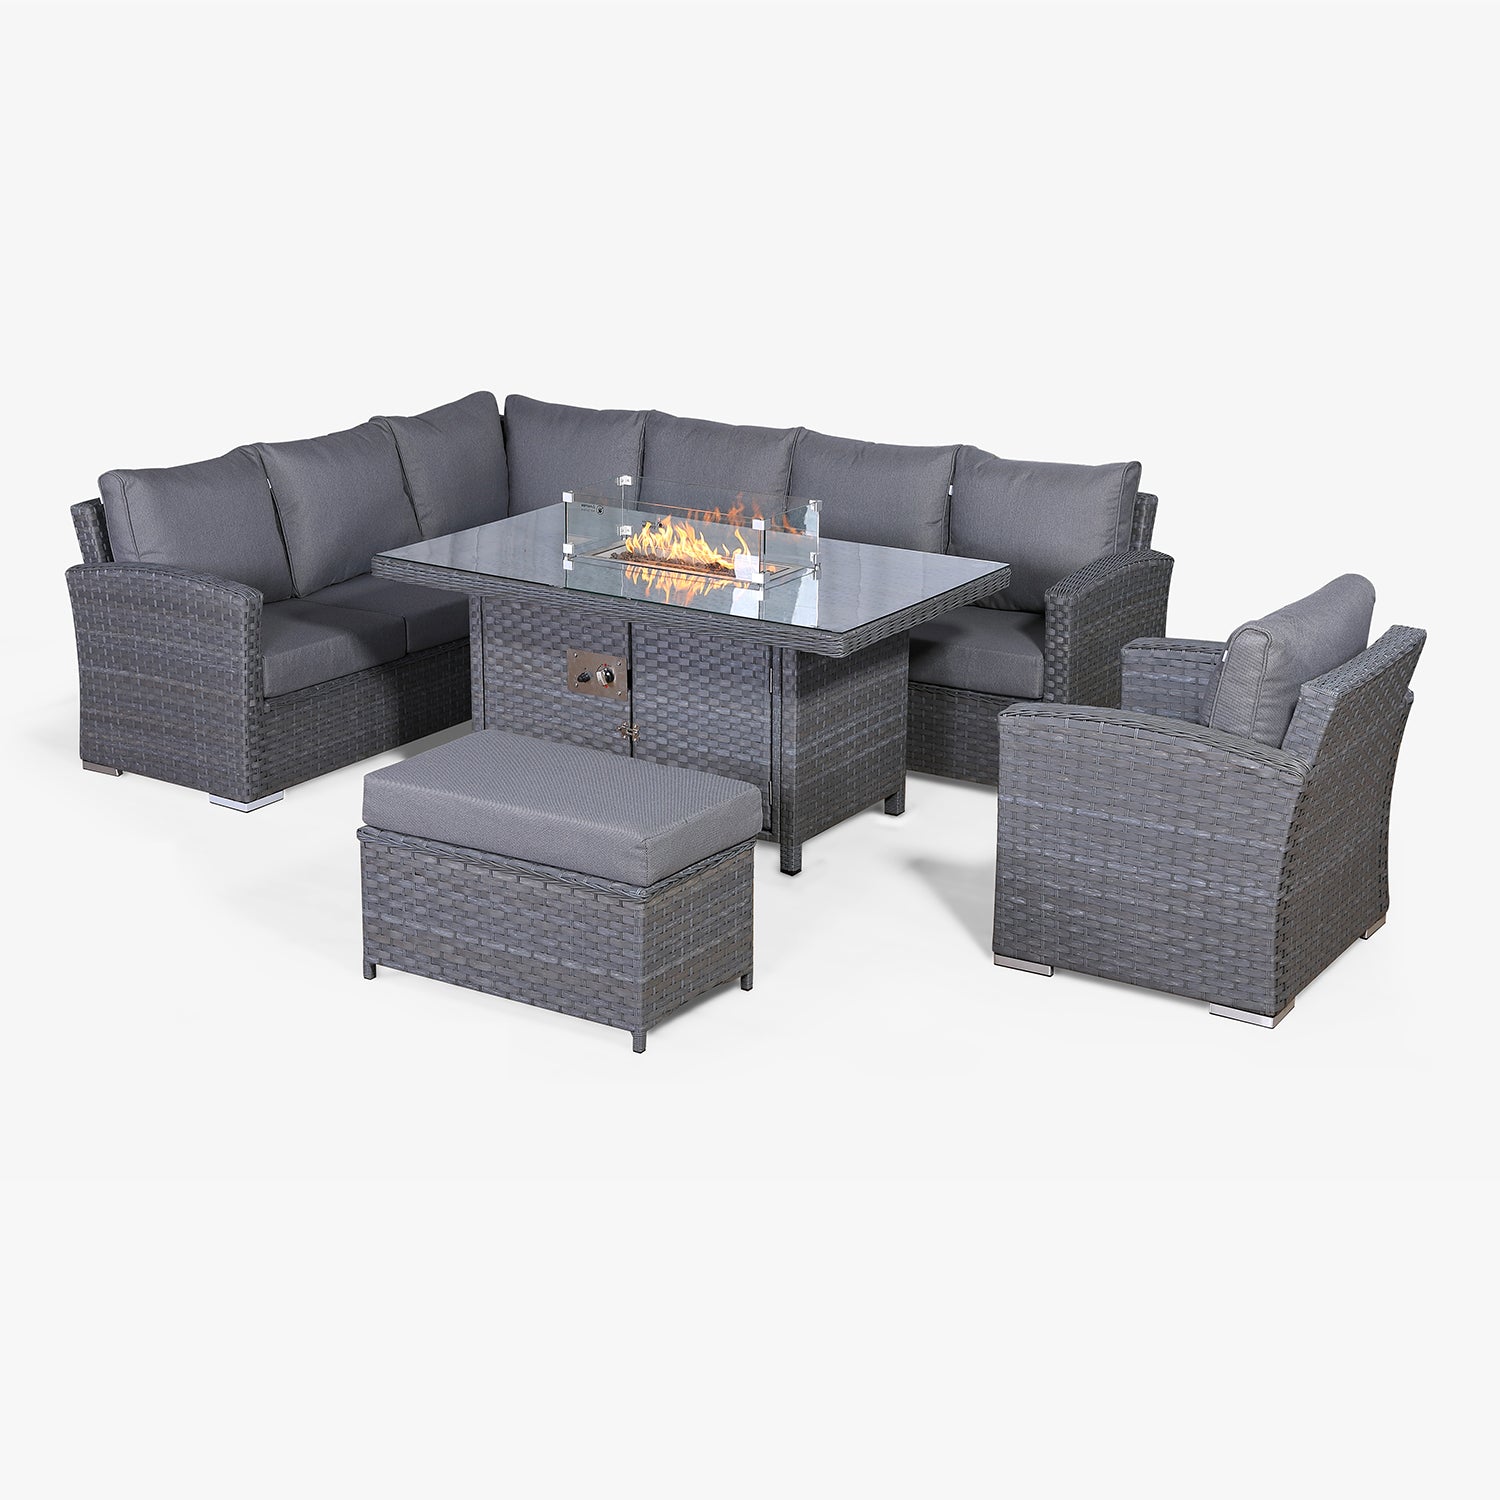 Victoria High Back Left Hand Corner Sofa Set with Arm Chair & Fire Pit Table in Slate Grey Weave